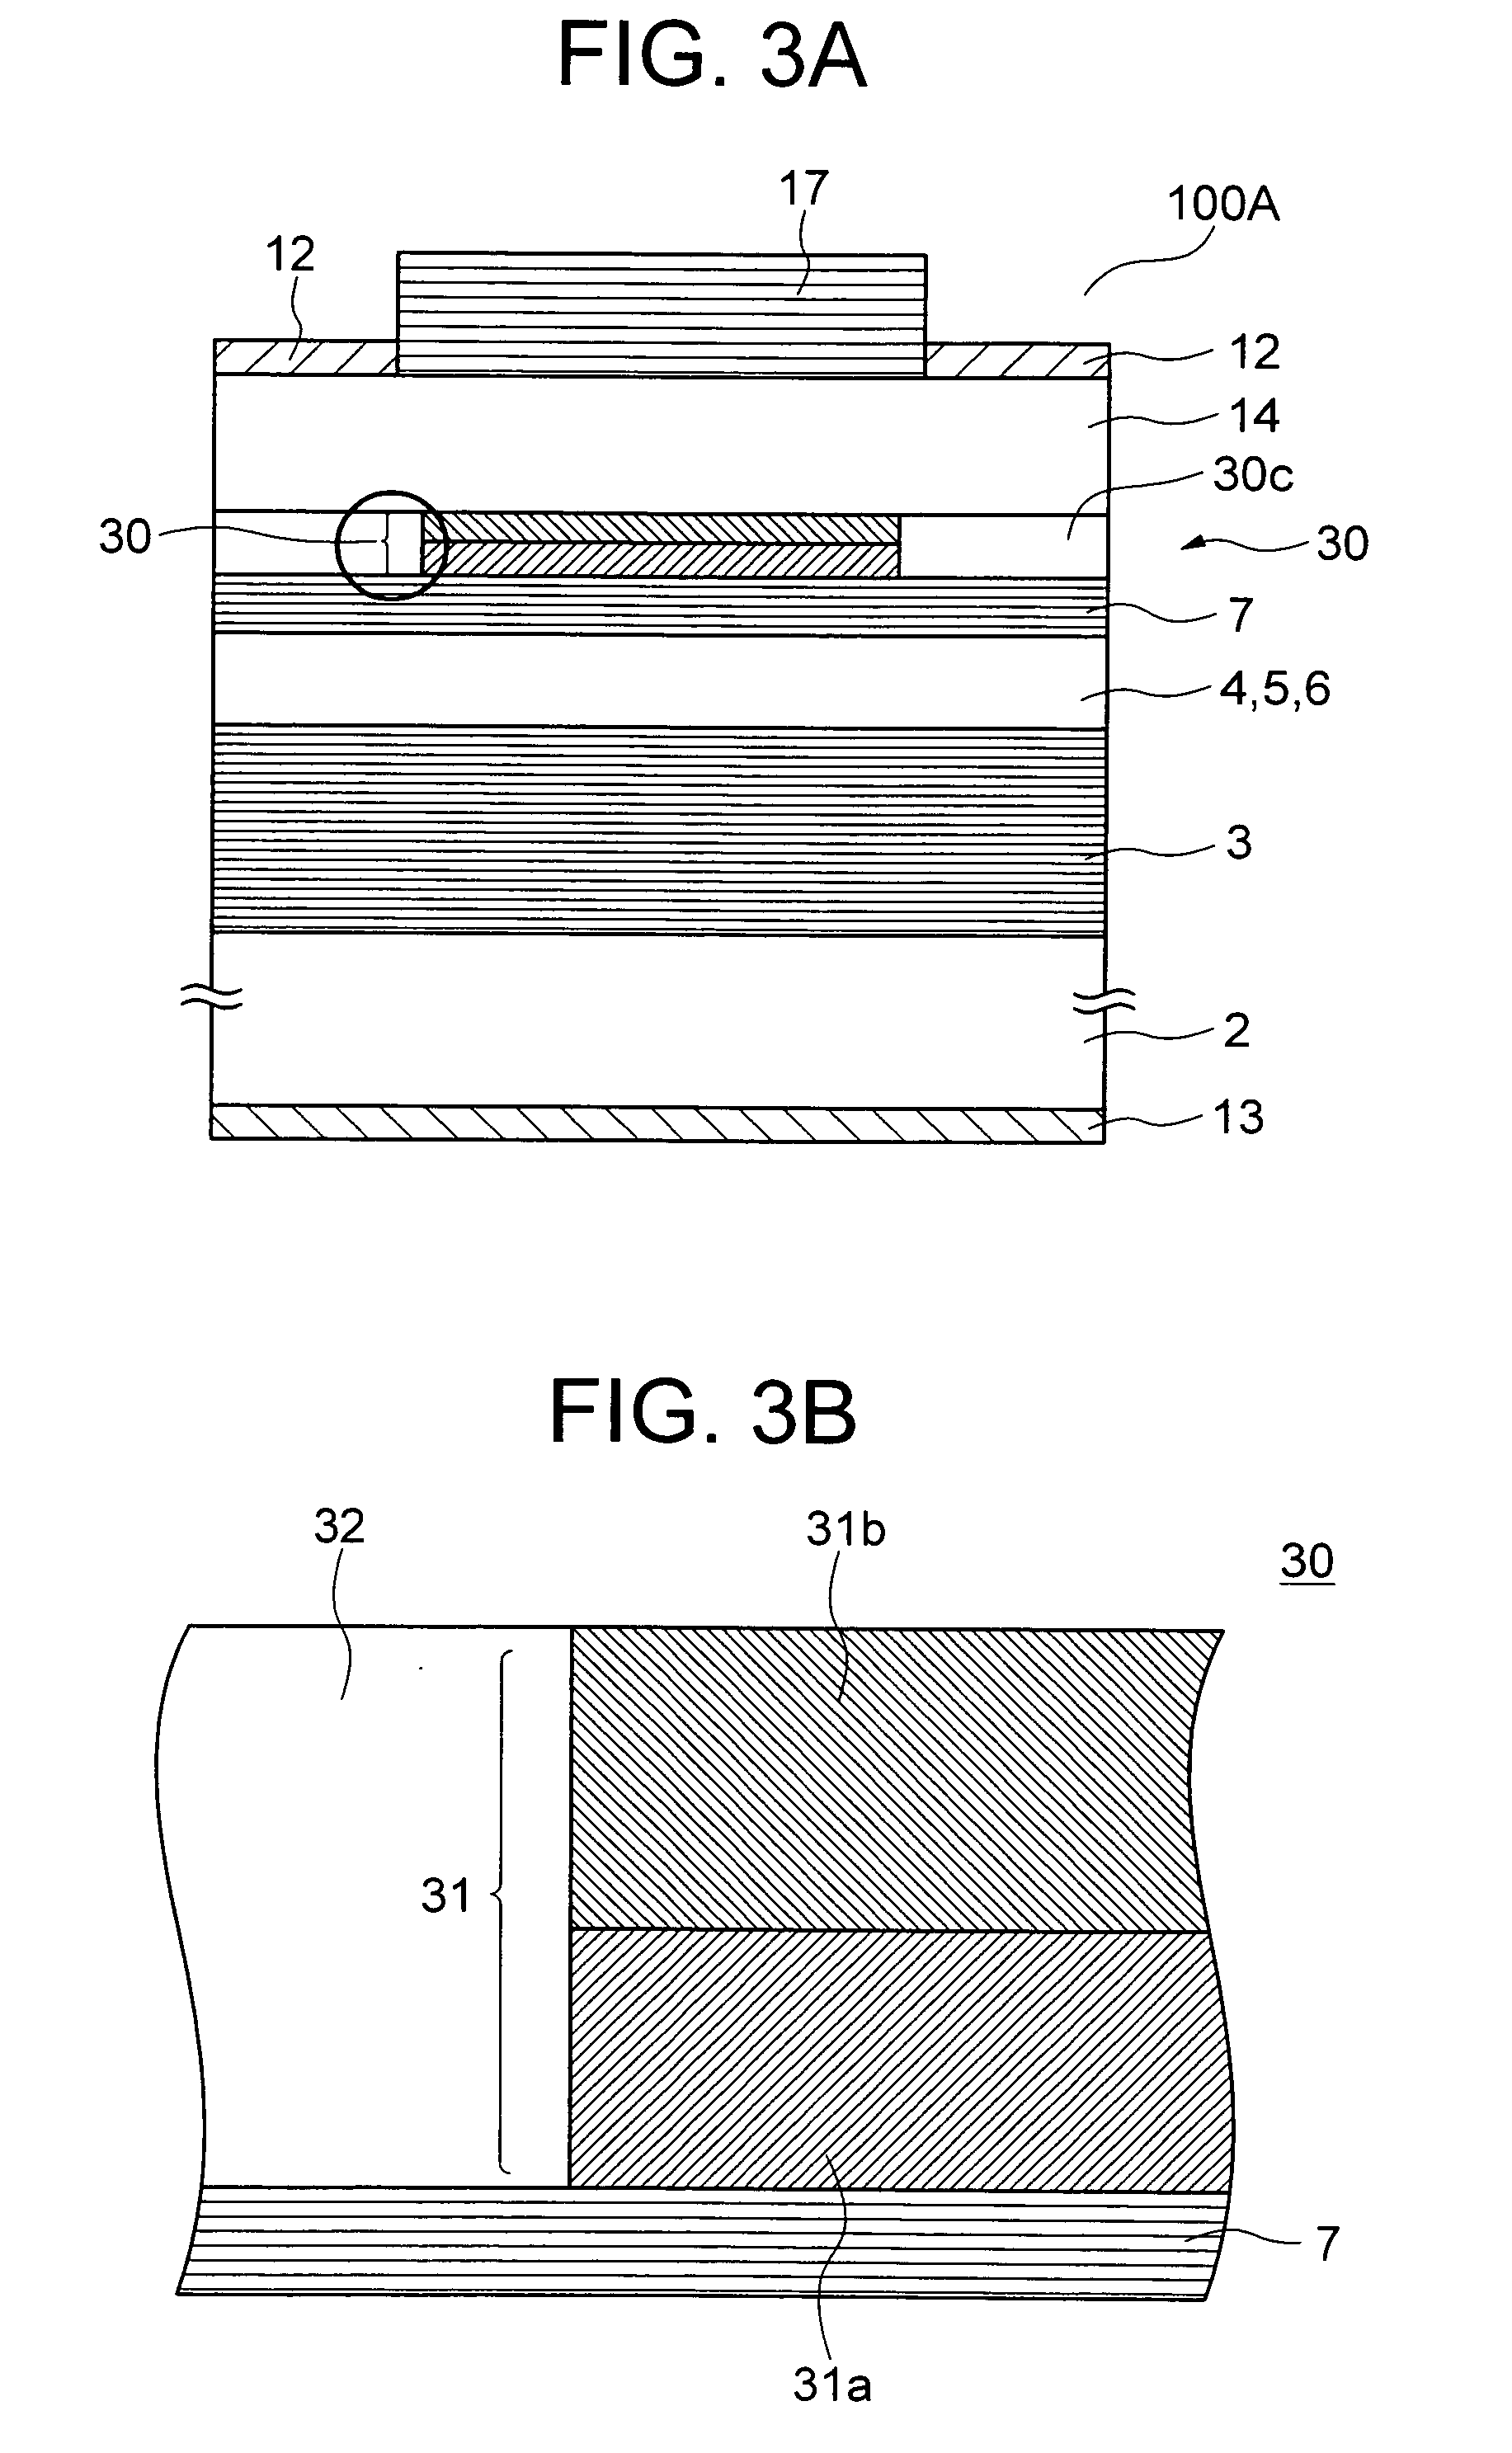 Vertical cavity surface emitting laser device having a higher optical output power